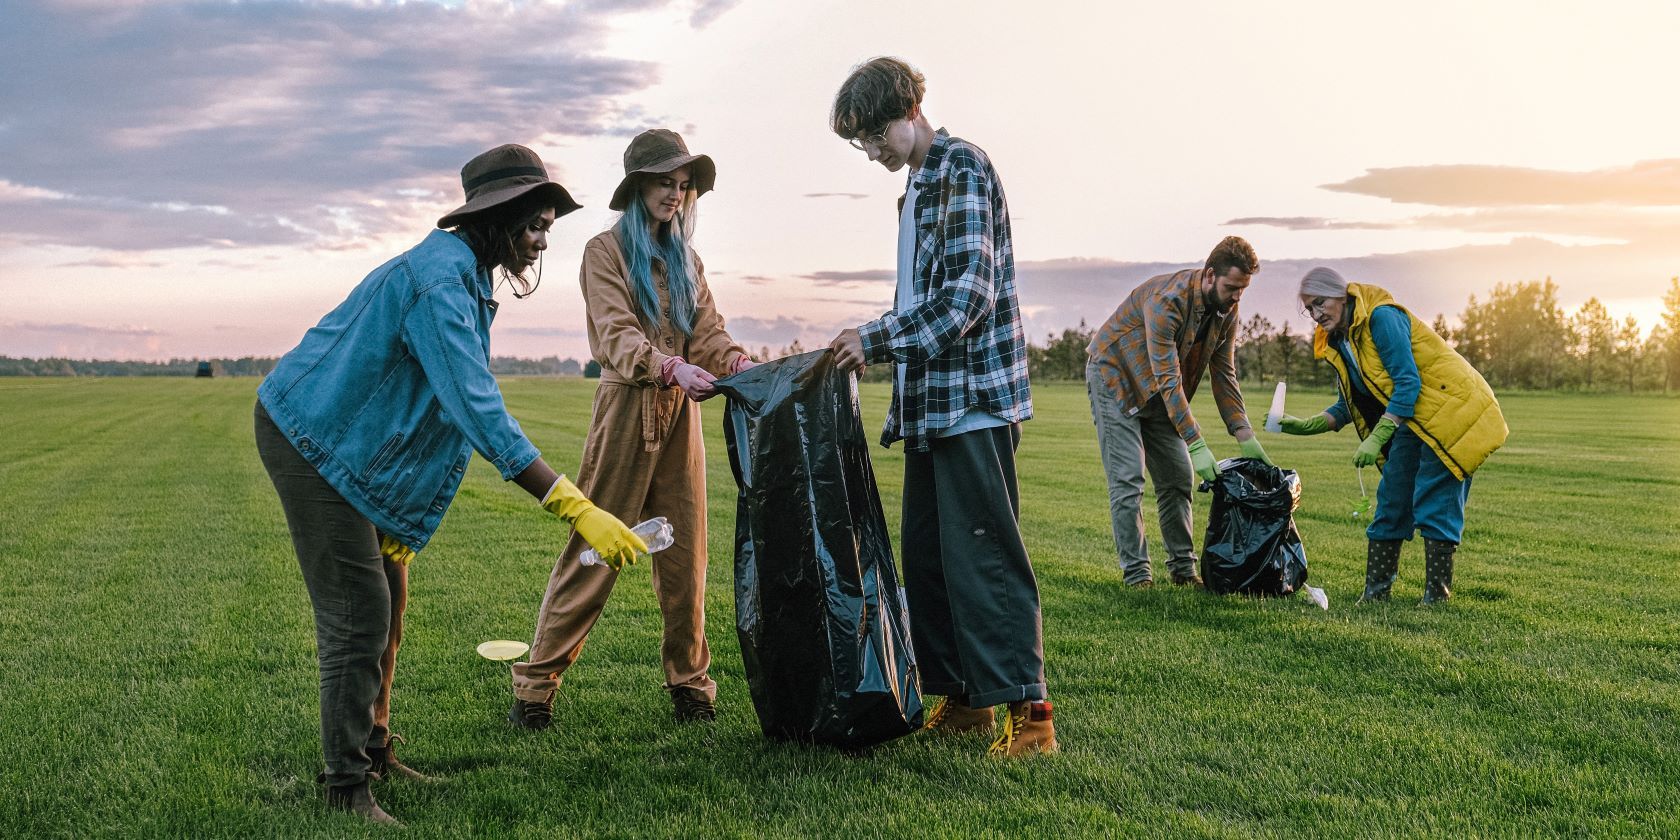 Five people in a grassy field collecting garbage in bin bags